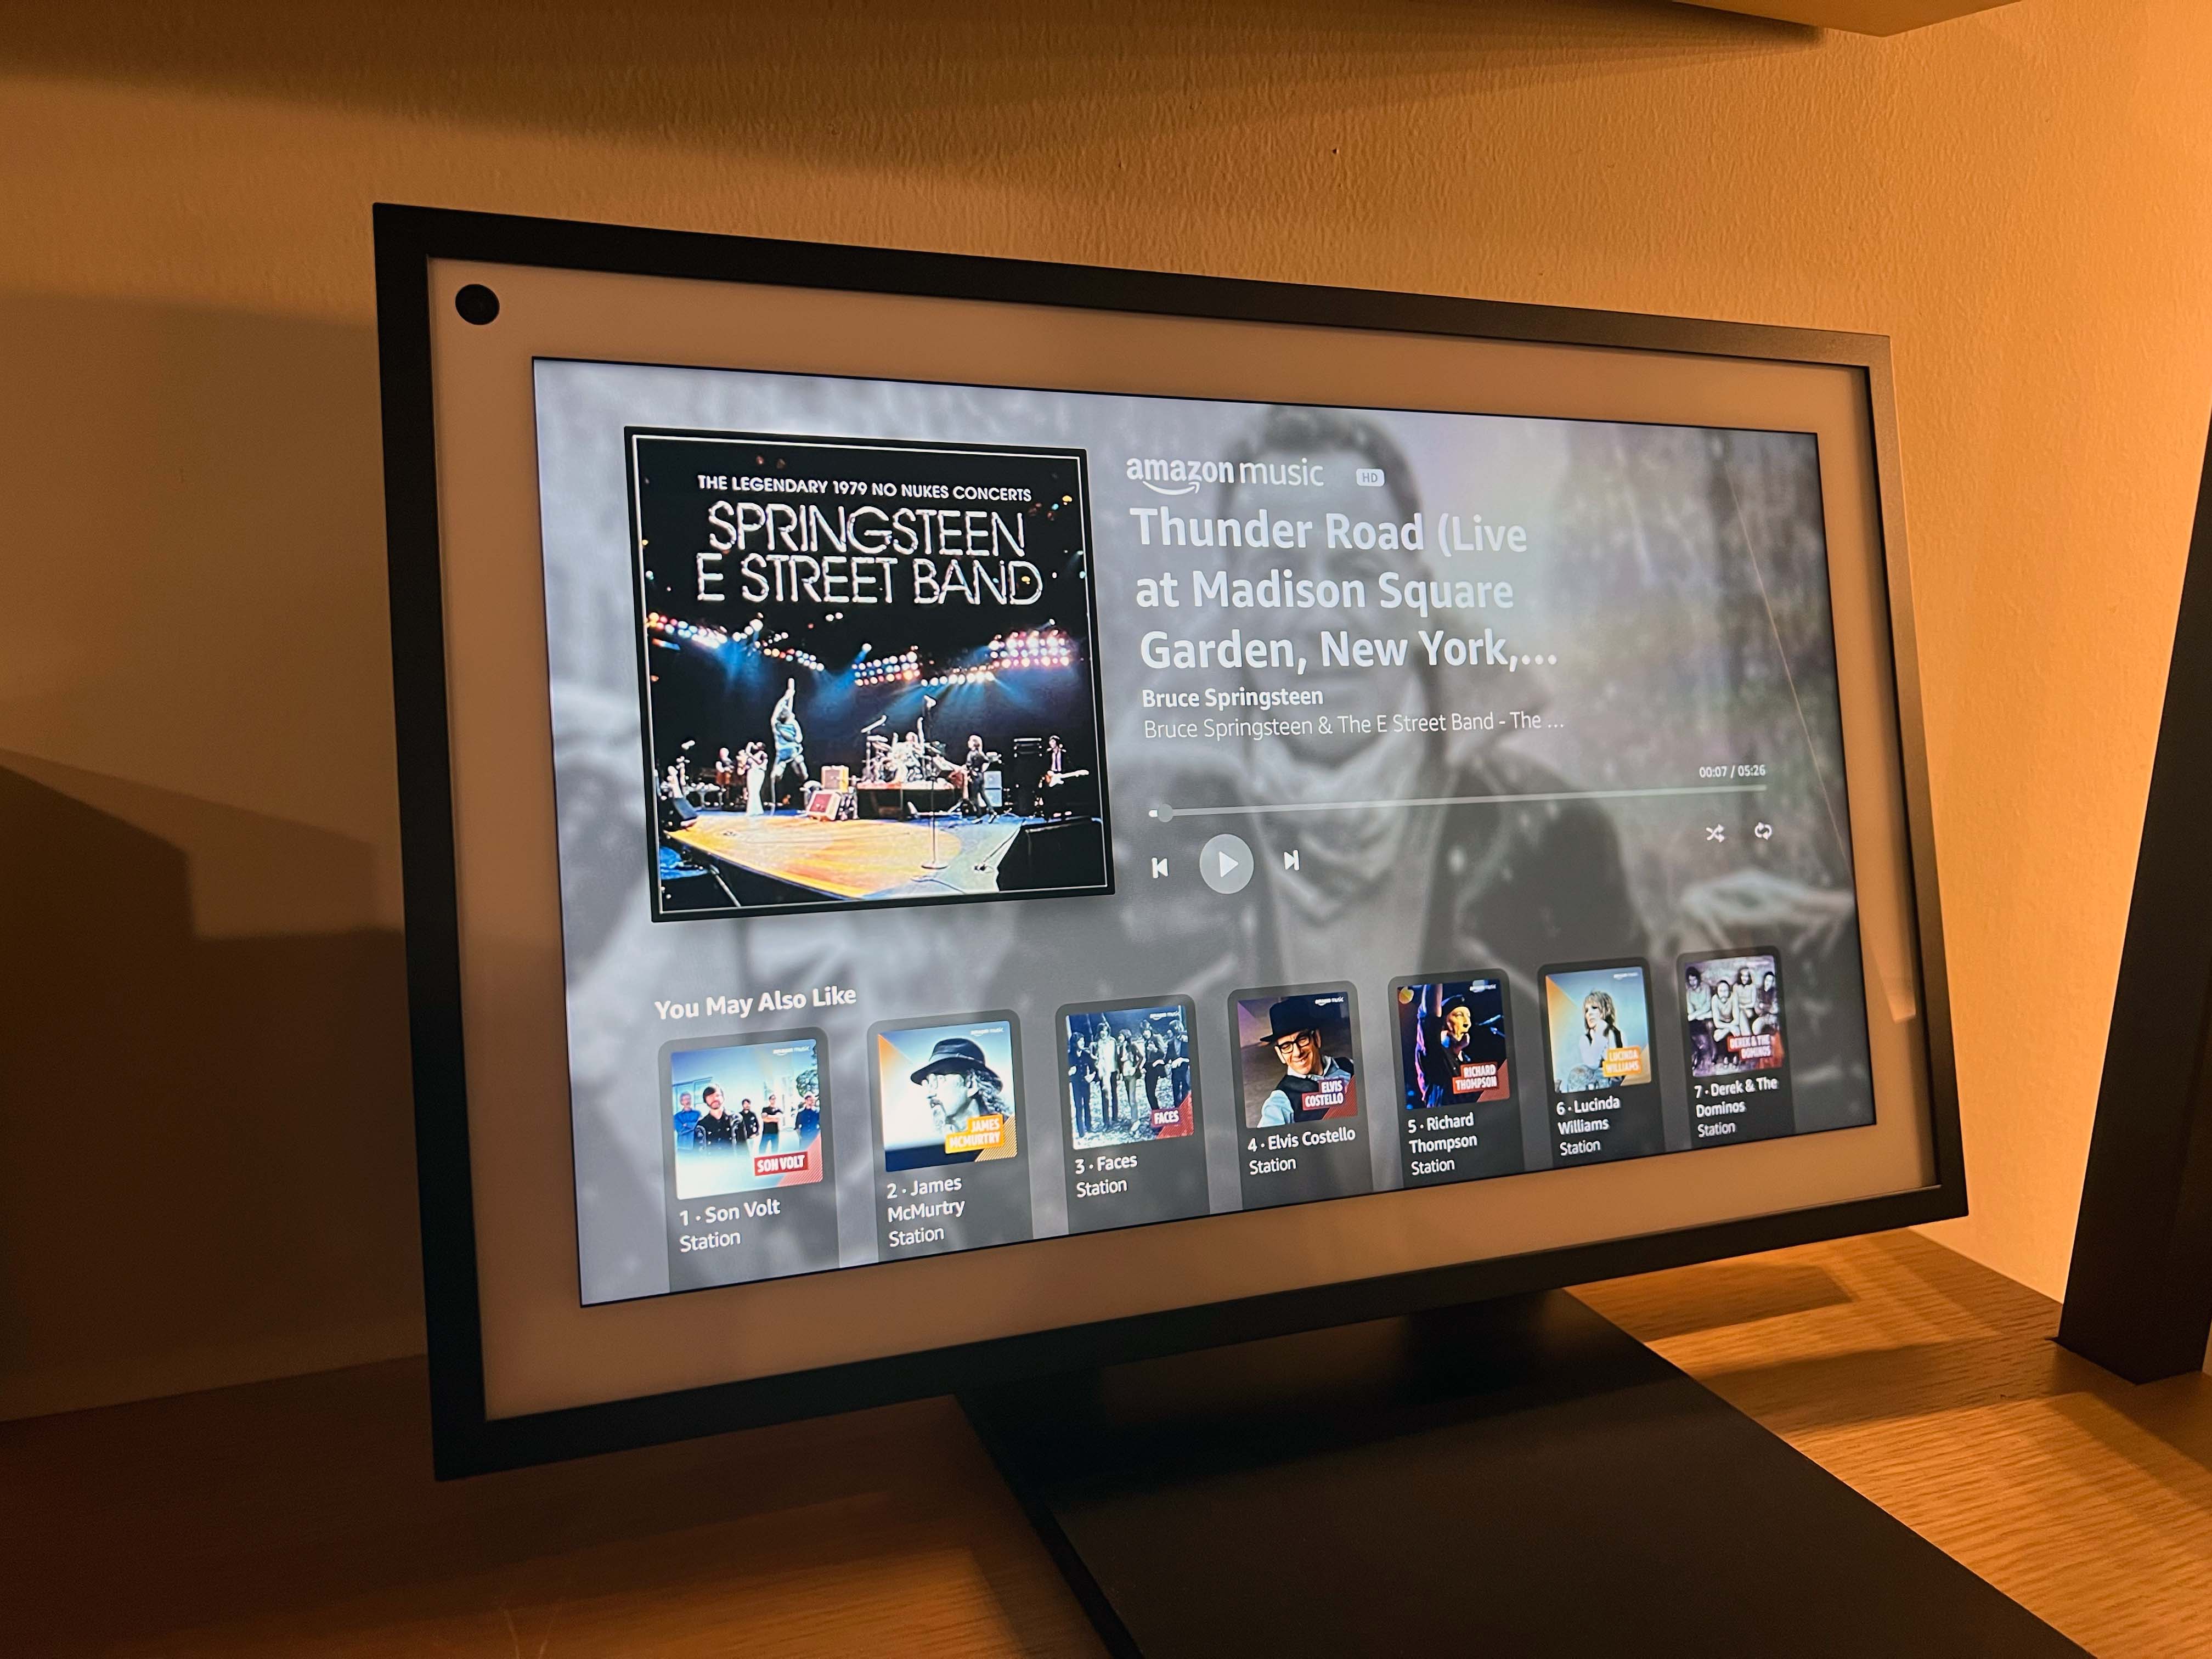 Echo Show 15 review: The biggest Alexa smart display ever is designed for  your wall - Video - CNET